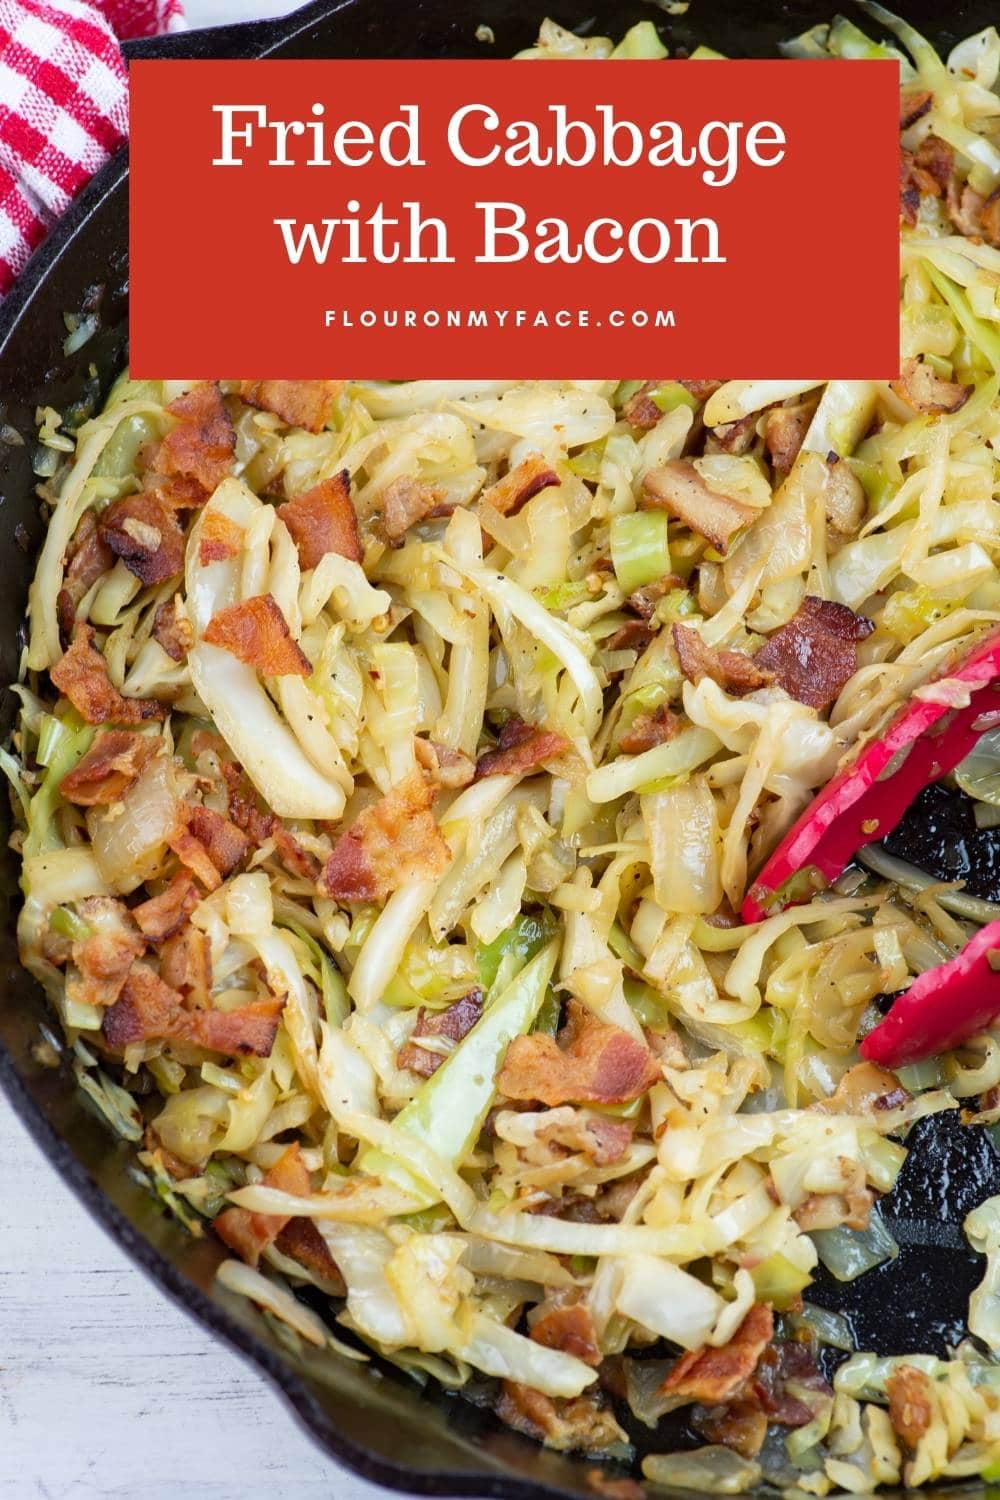 Cabbage cooked with bacon in a cast iron skillet.